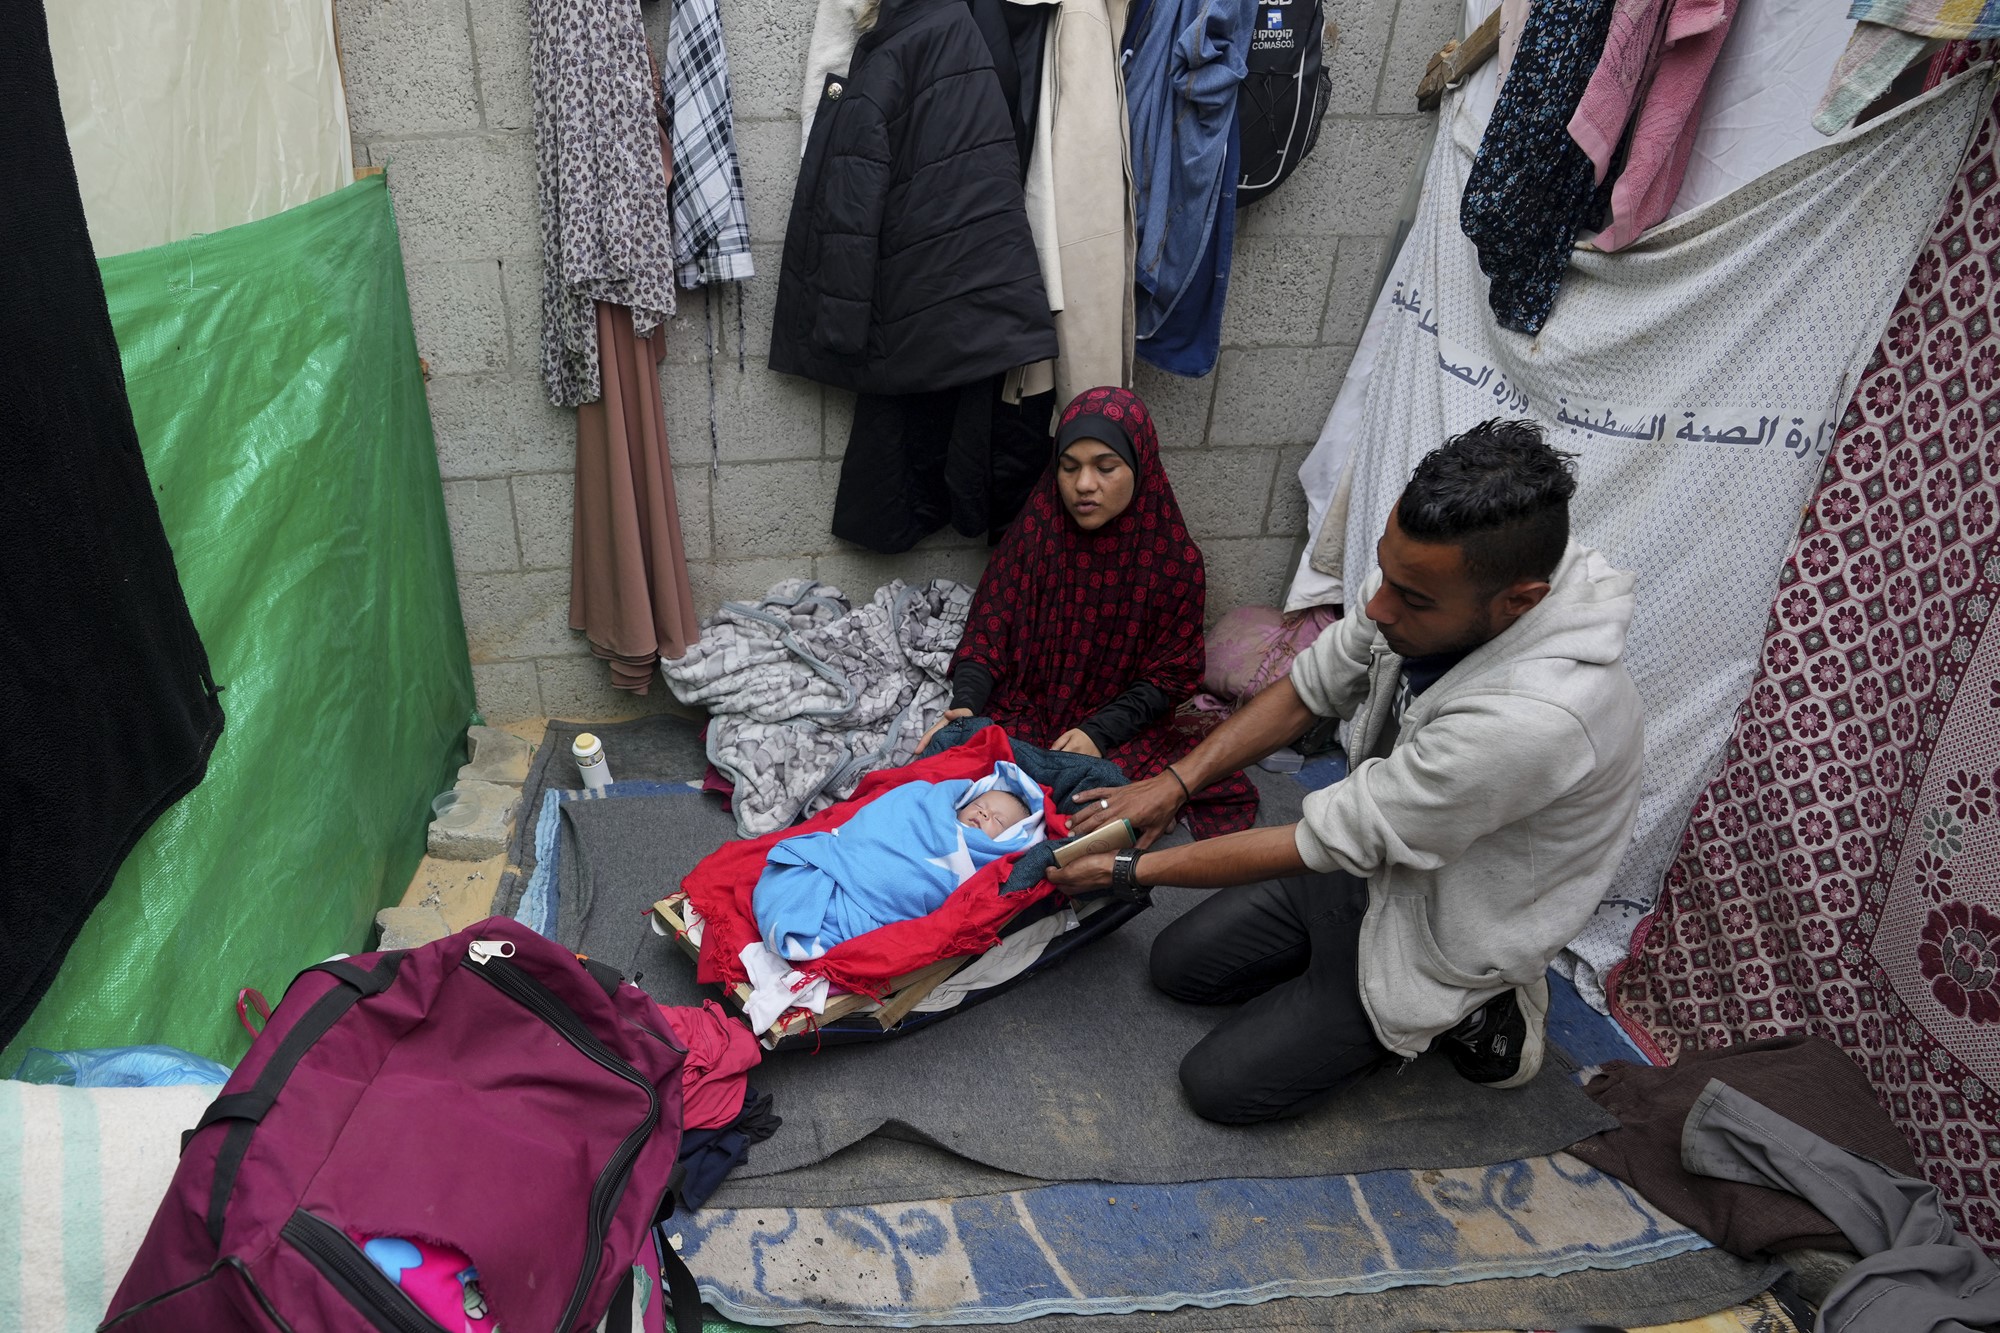 Family sits on the ground around a baby sleeping in a blue blanket. Clothes hang on the wall behind them.